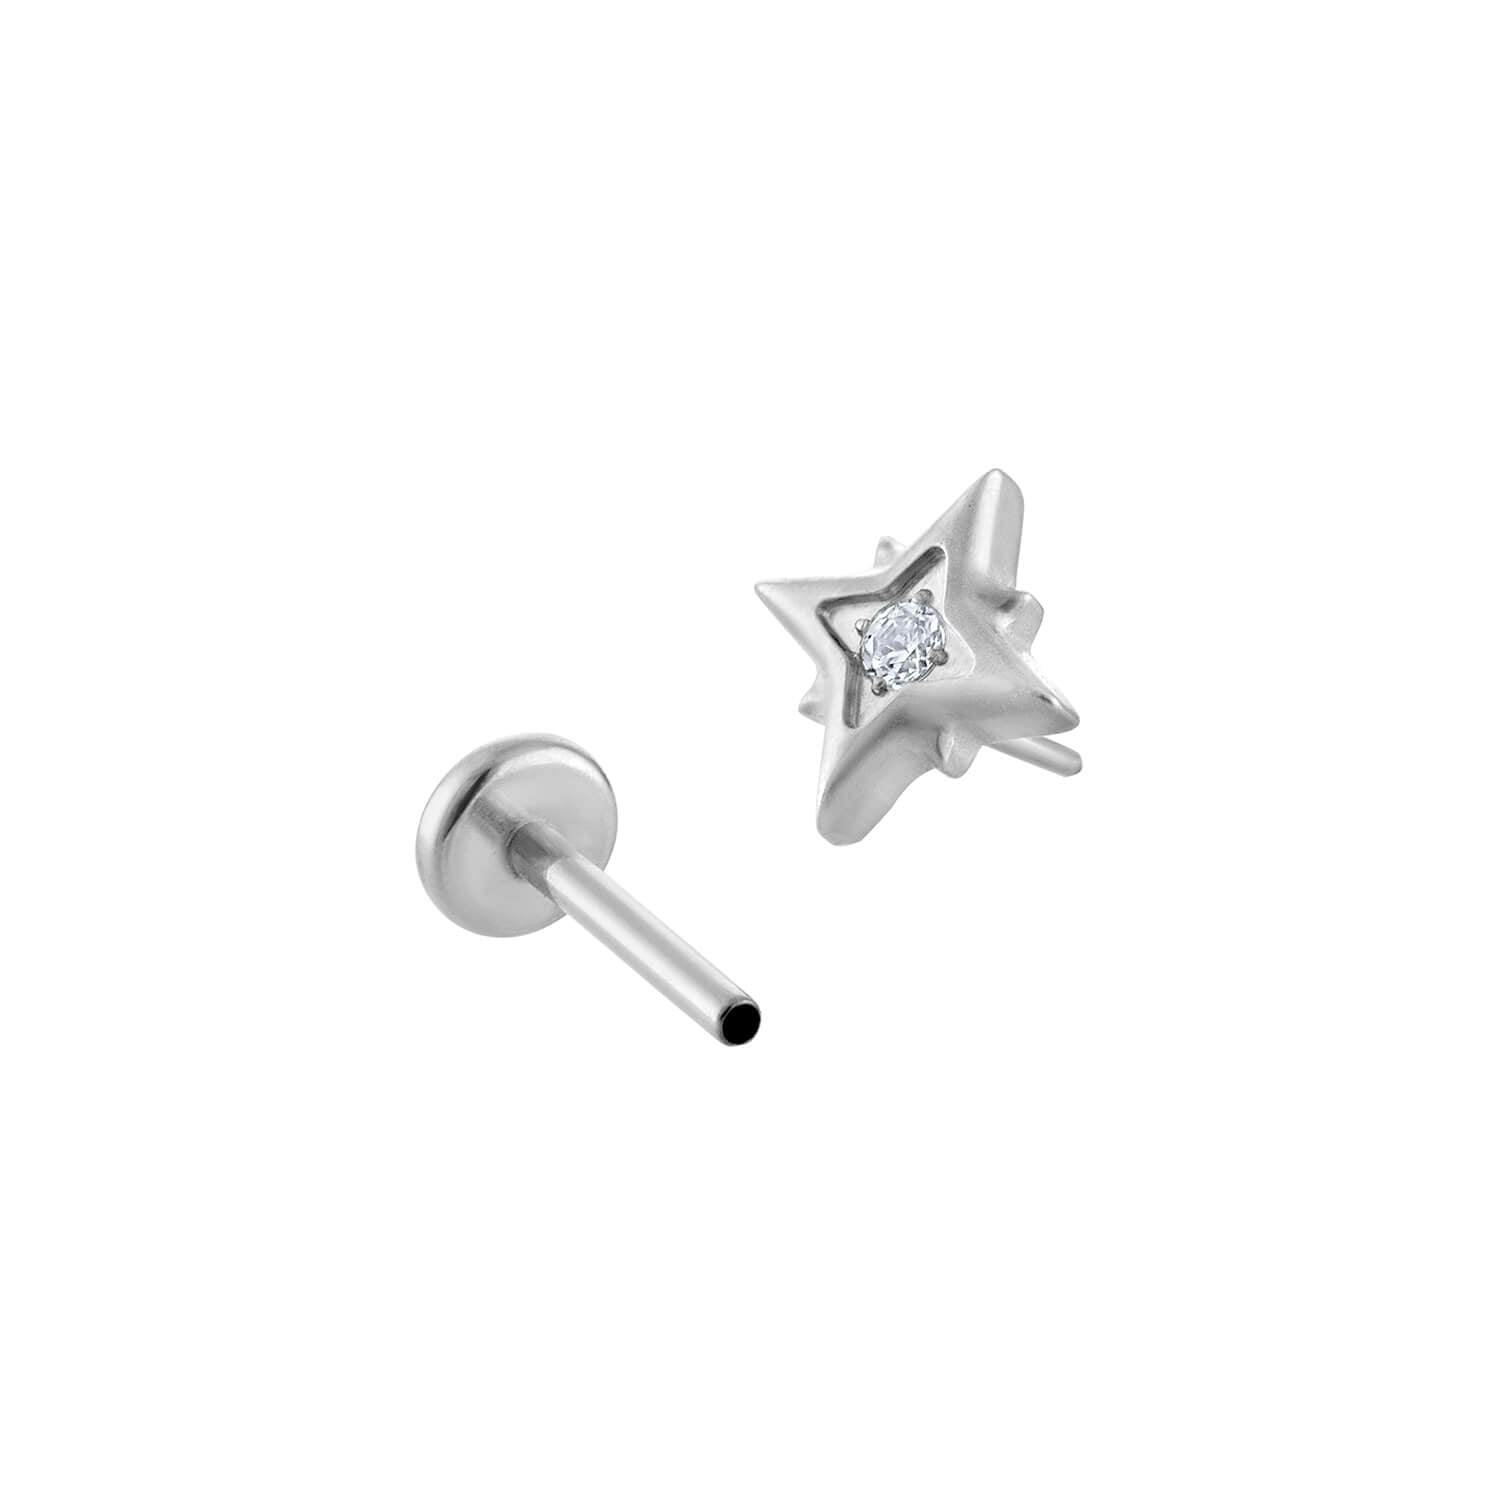 North Star Nap Earrings in Silver